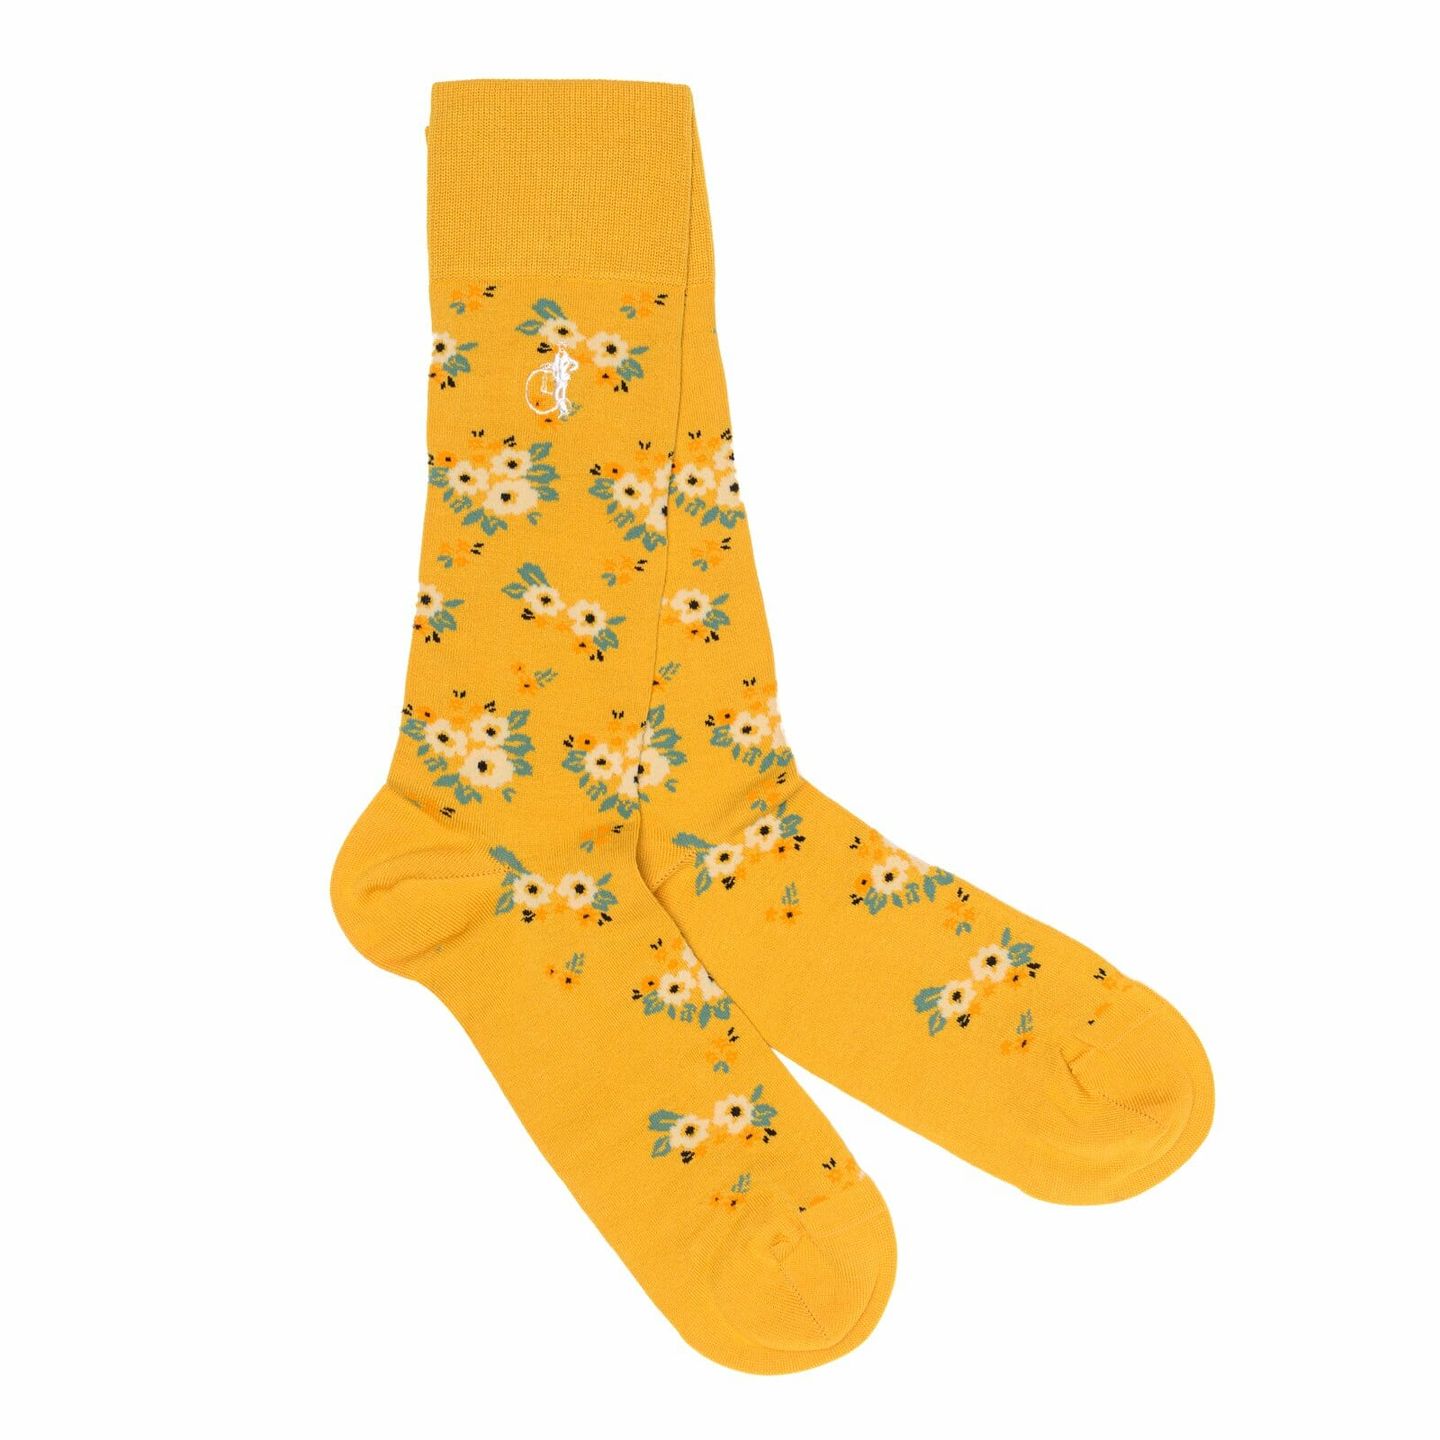 Pair of yellow socks with flower designs as part of the Spring foral collection